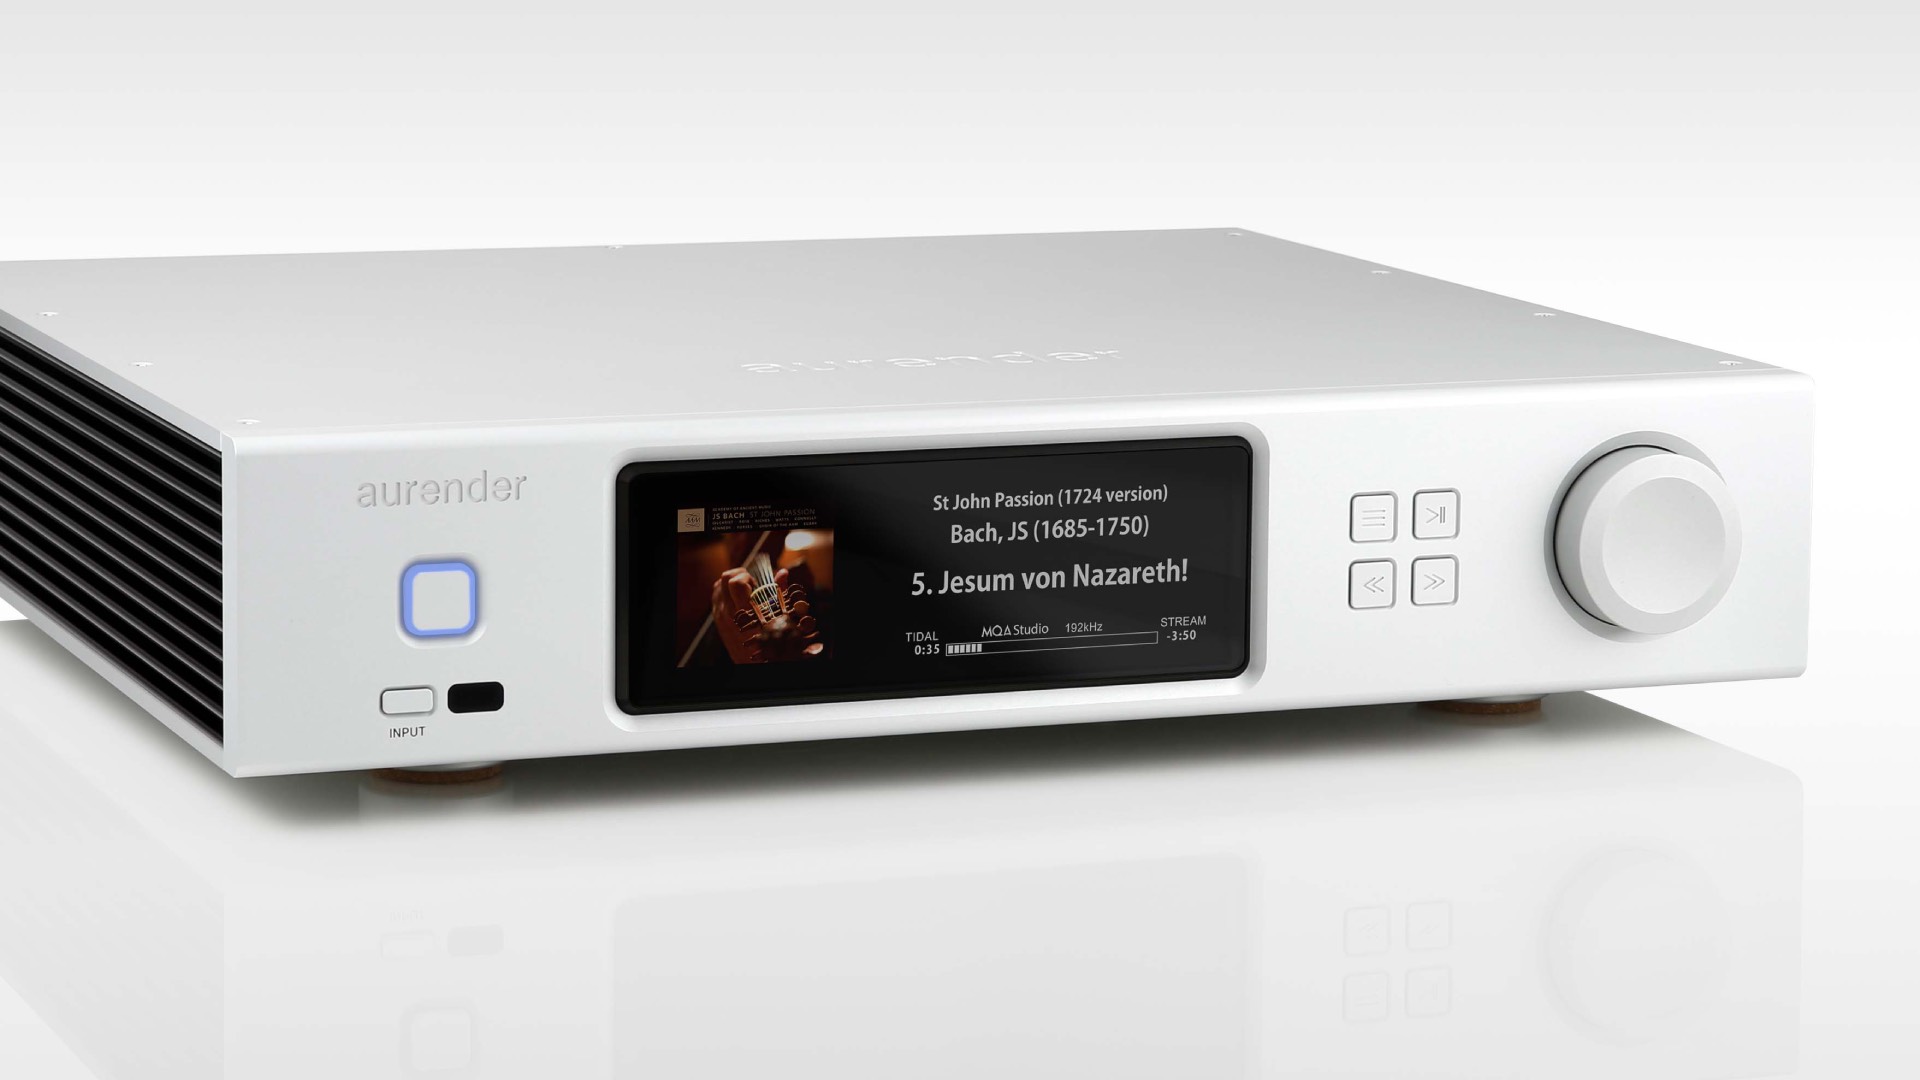 The Aurender A15 is a full-on streamer and server with built-in DAC and analog outputs. (Image Credit: Aurender)